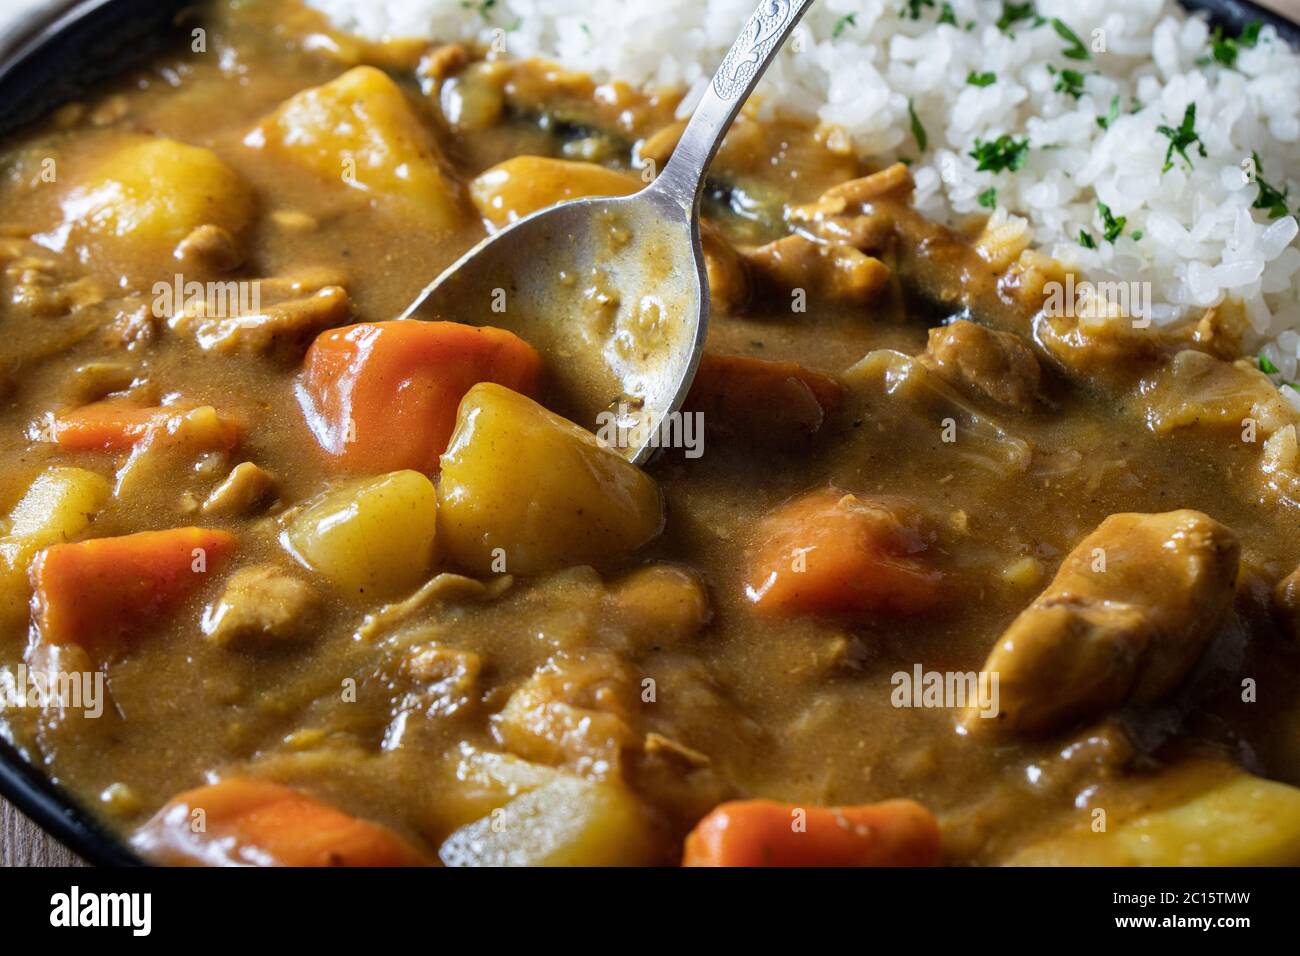 Japanese chicken, beef and pork curry. Asian cuisine. Stock Photo